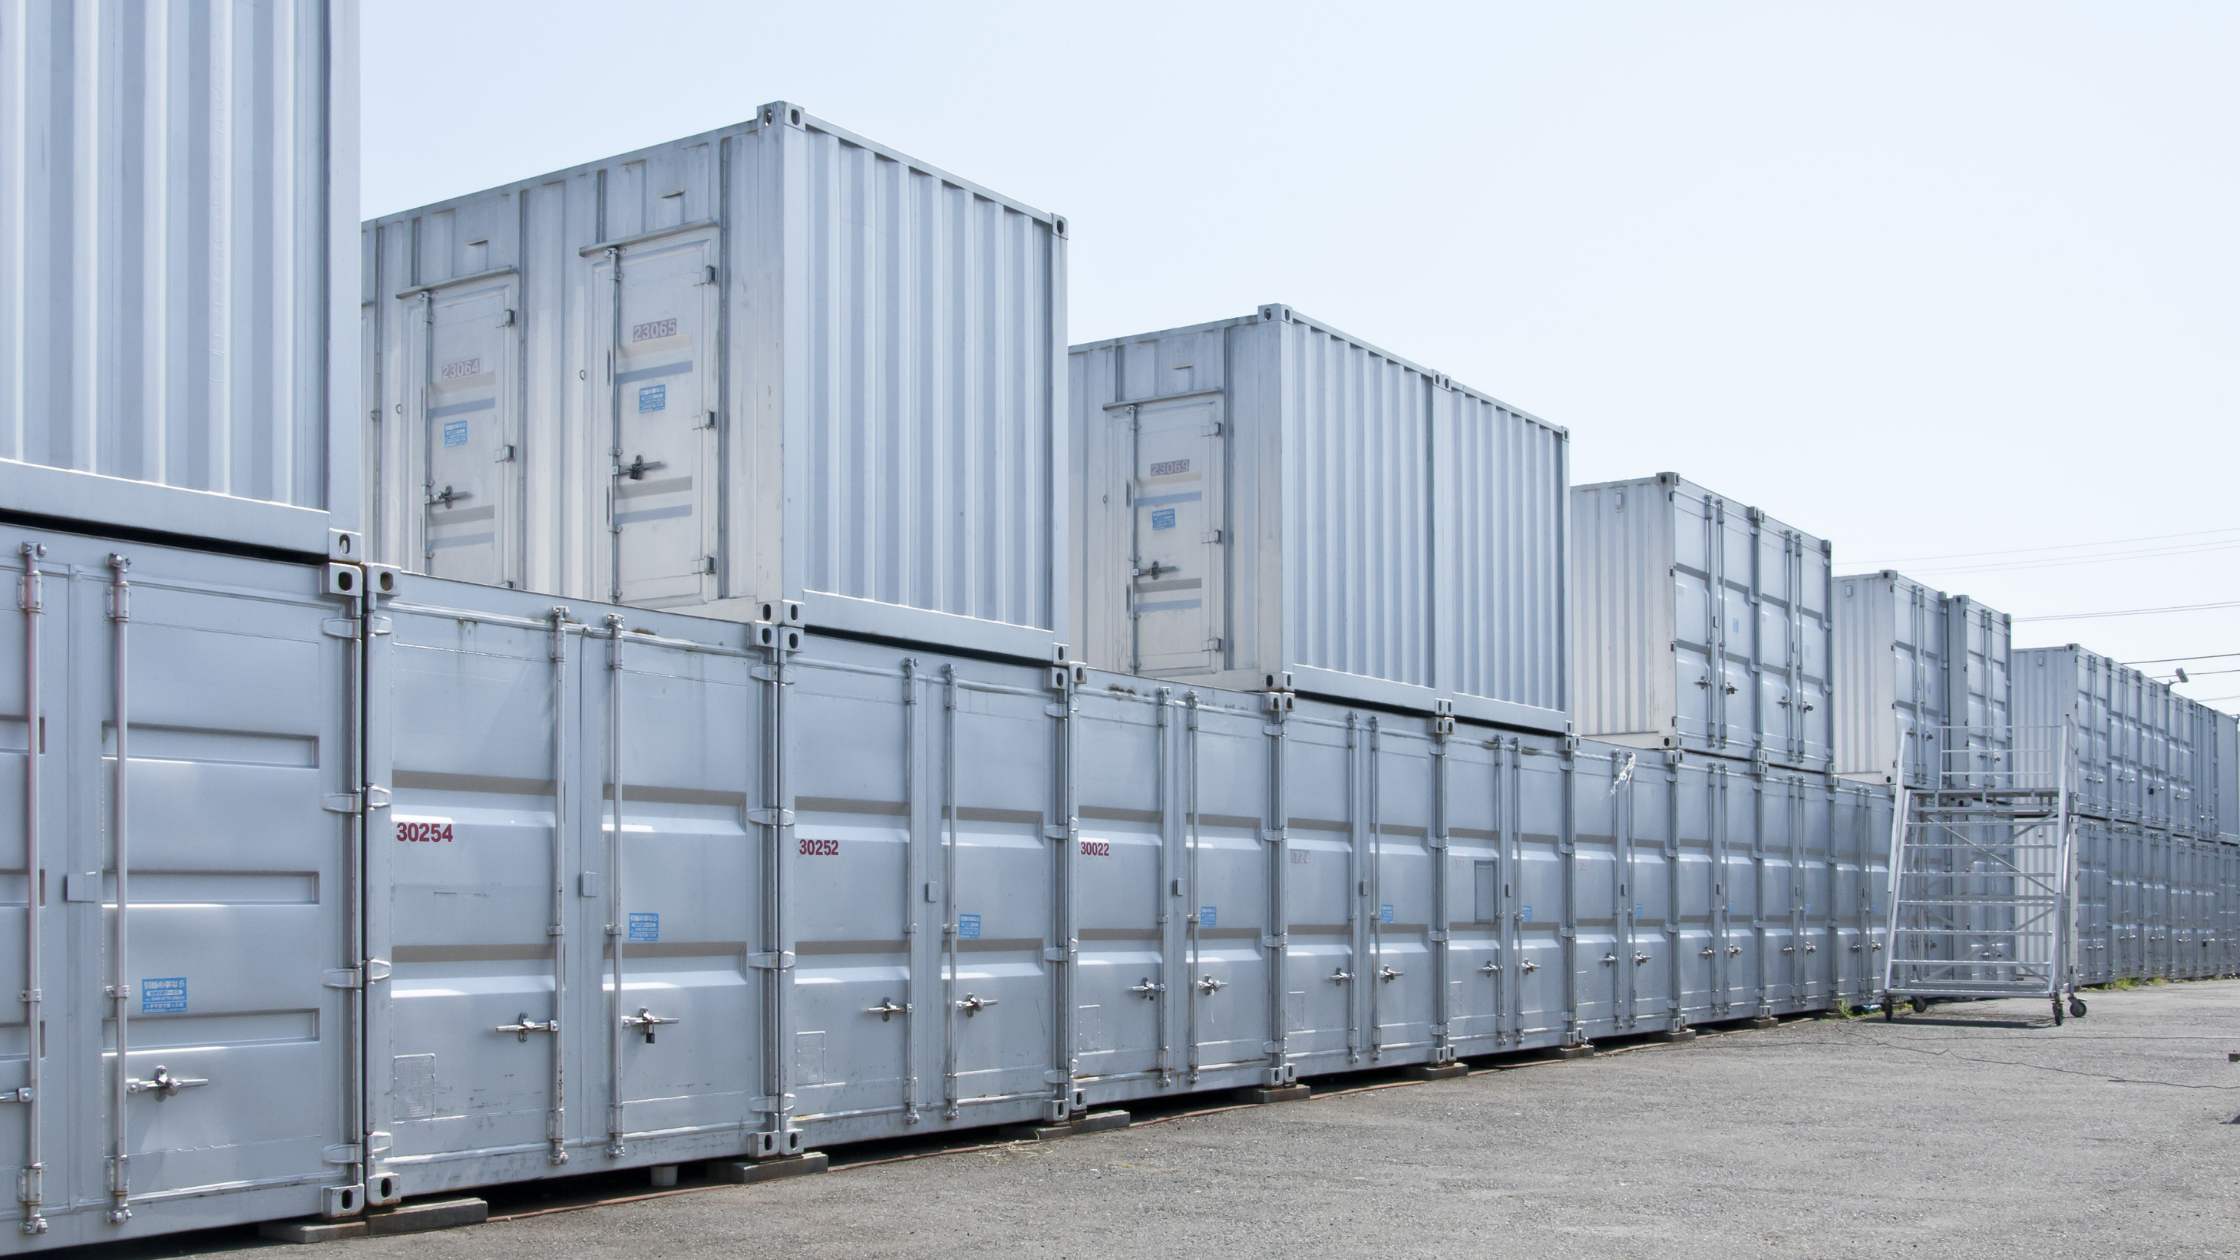 Steel Doors Self Storage Storage Rooms Rooms x 20 Units Shipping Container